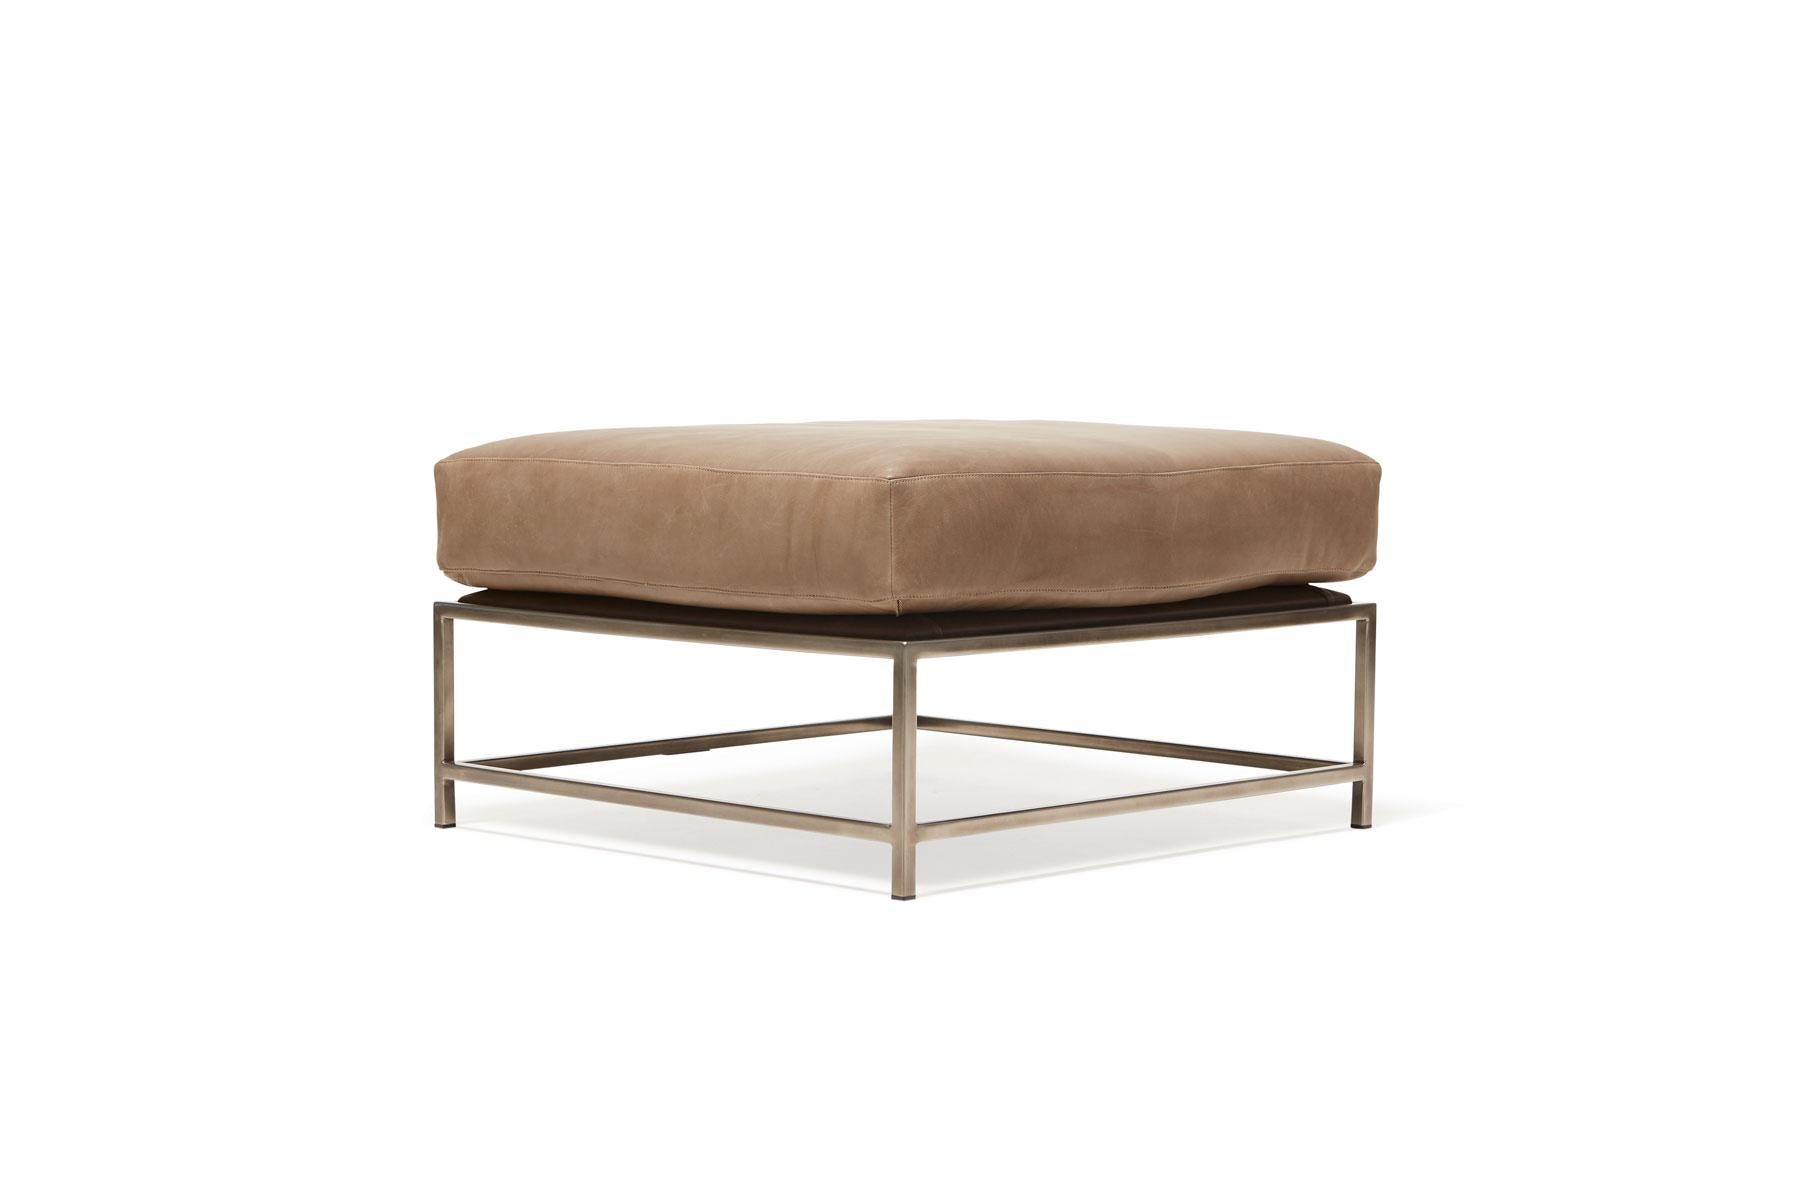 The ottoman from Stephen Kenn's Inheritance Collection is a versatile piece to add a lounge element to your seating arrangement.

This ottoman is upholstered in a pebbled leather from the Harness collection by Moore & Giles. The foam cushion has